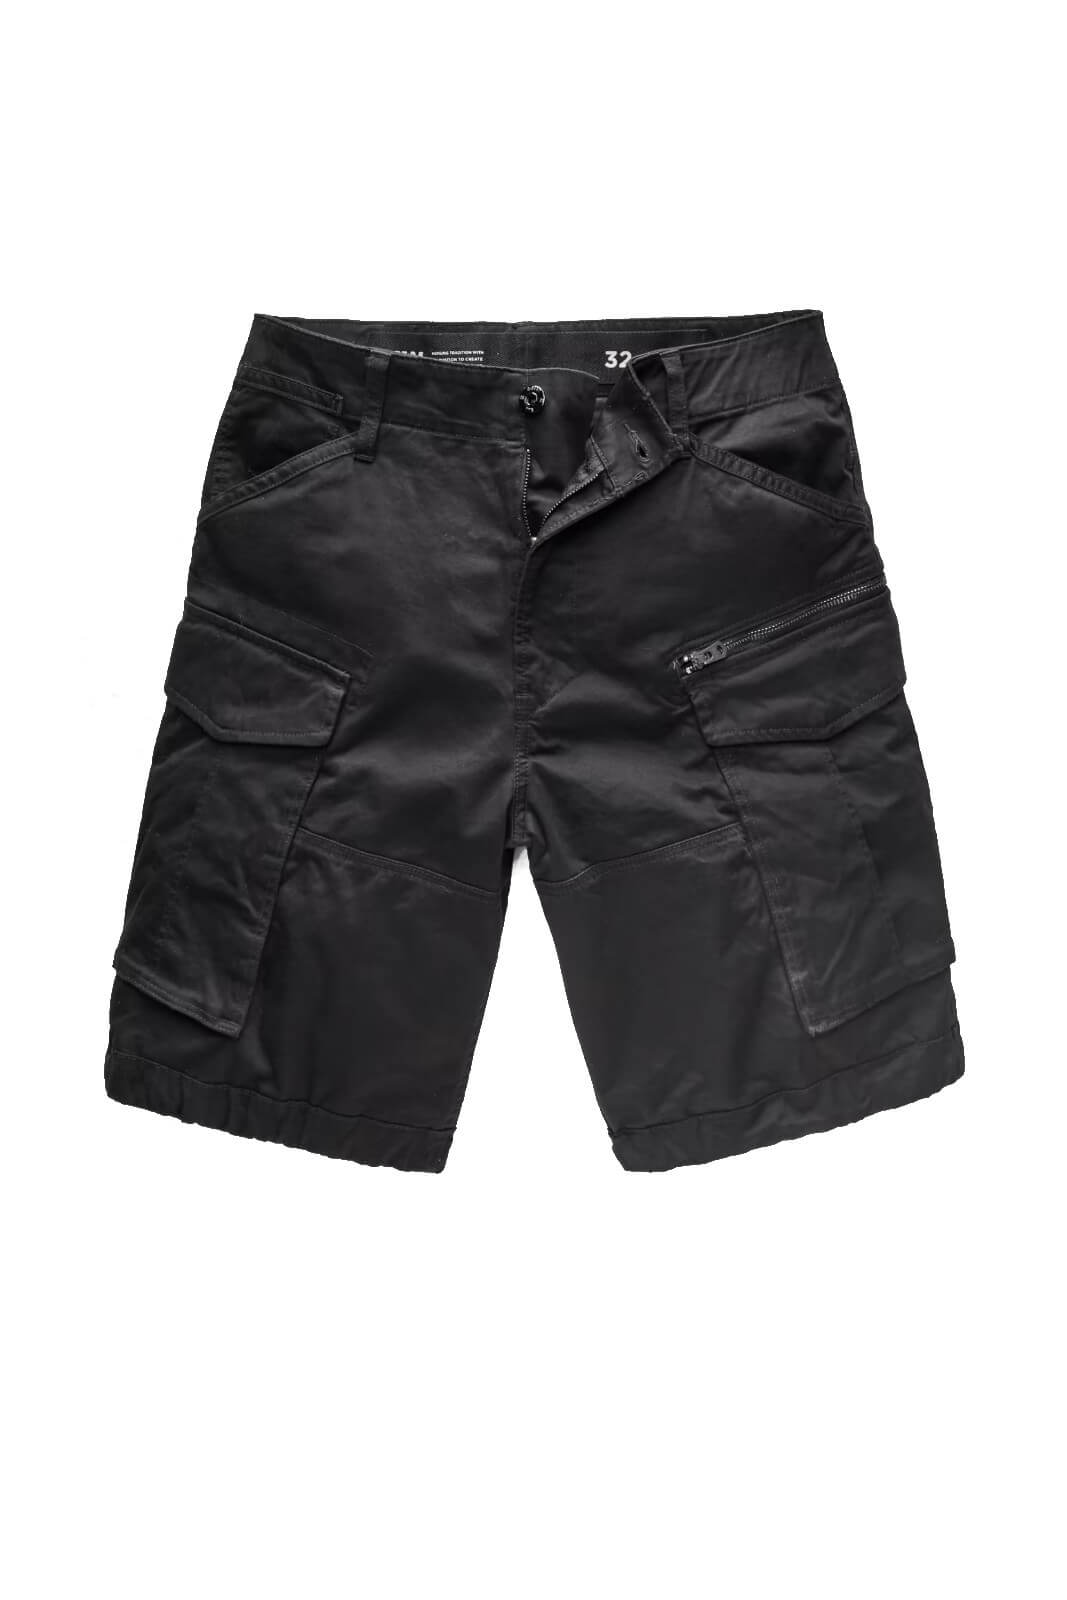 G-Star RAW men's shorts ROVIC RELAXED